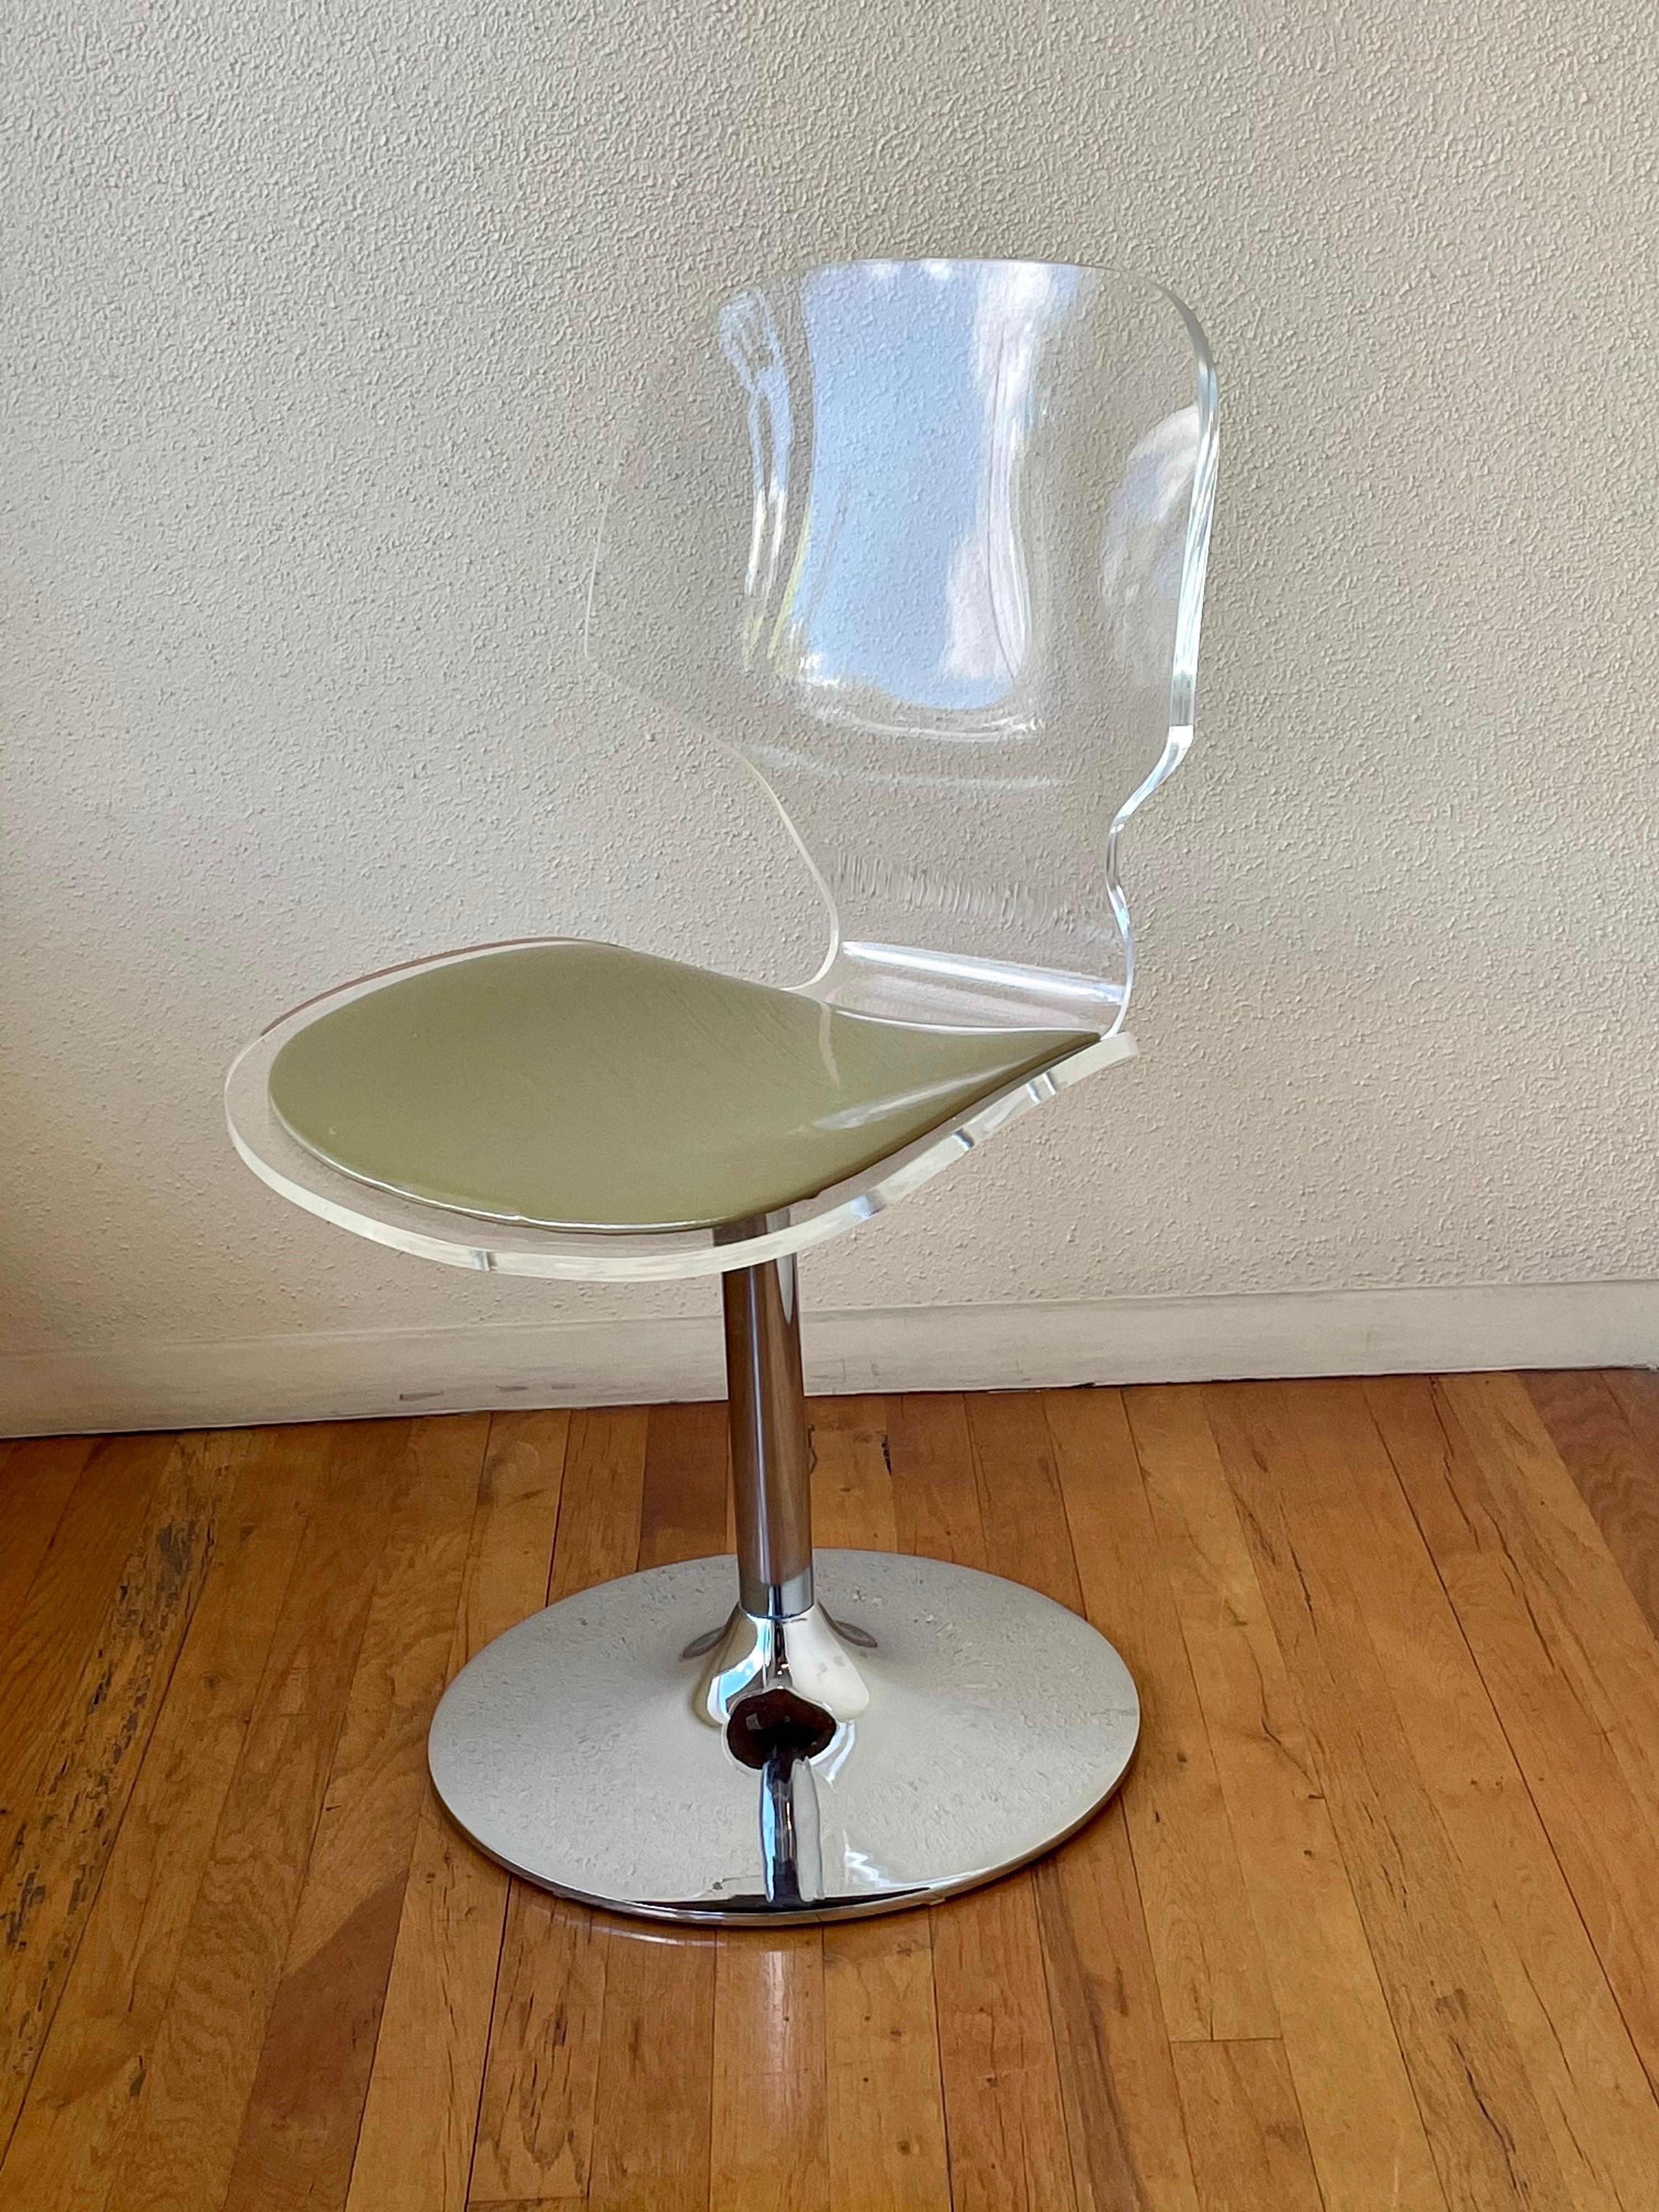 Striking Set of 4 Space Age Lucite and Chrome Swivel Chairs 1